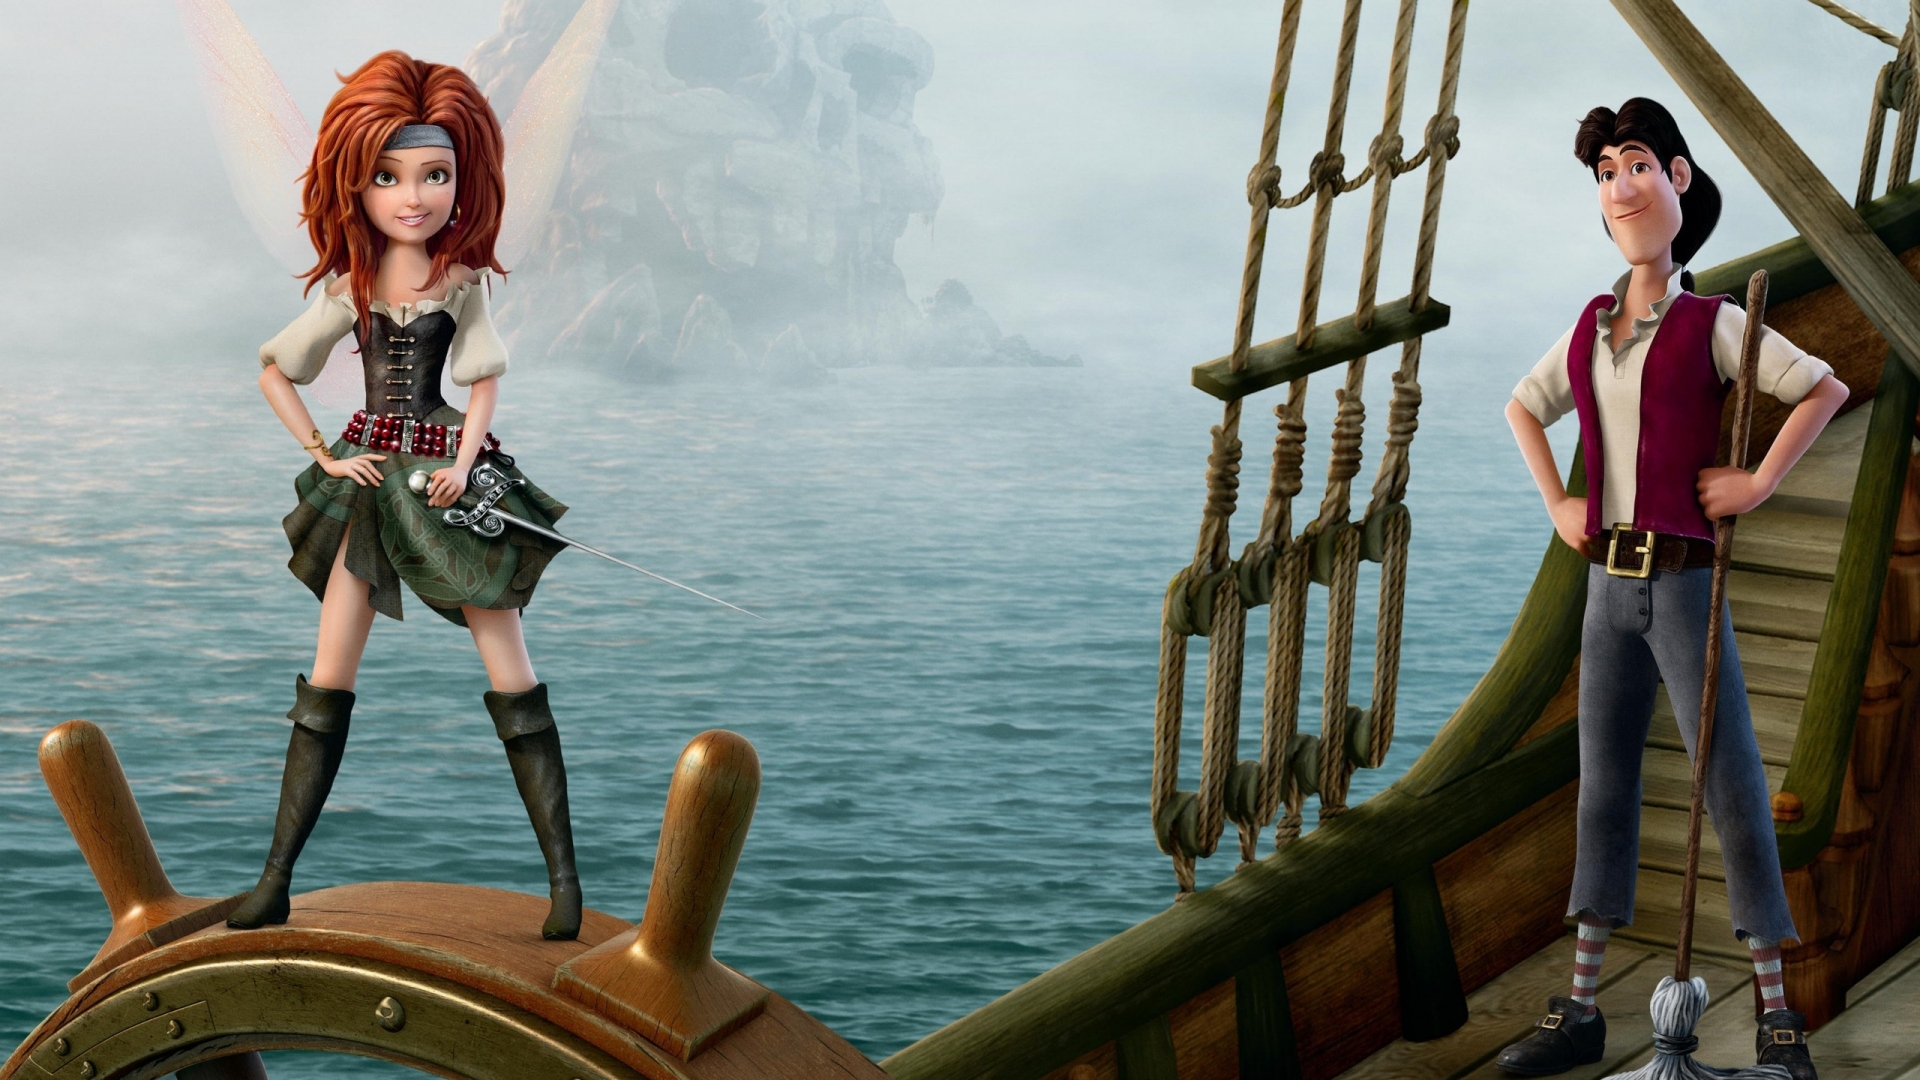 The Pirate Fairy for 1920 x 1080 HDTV 1080p resolution